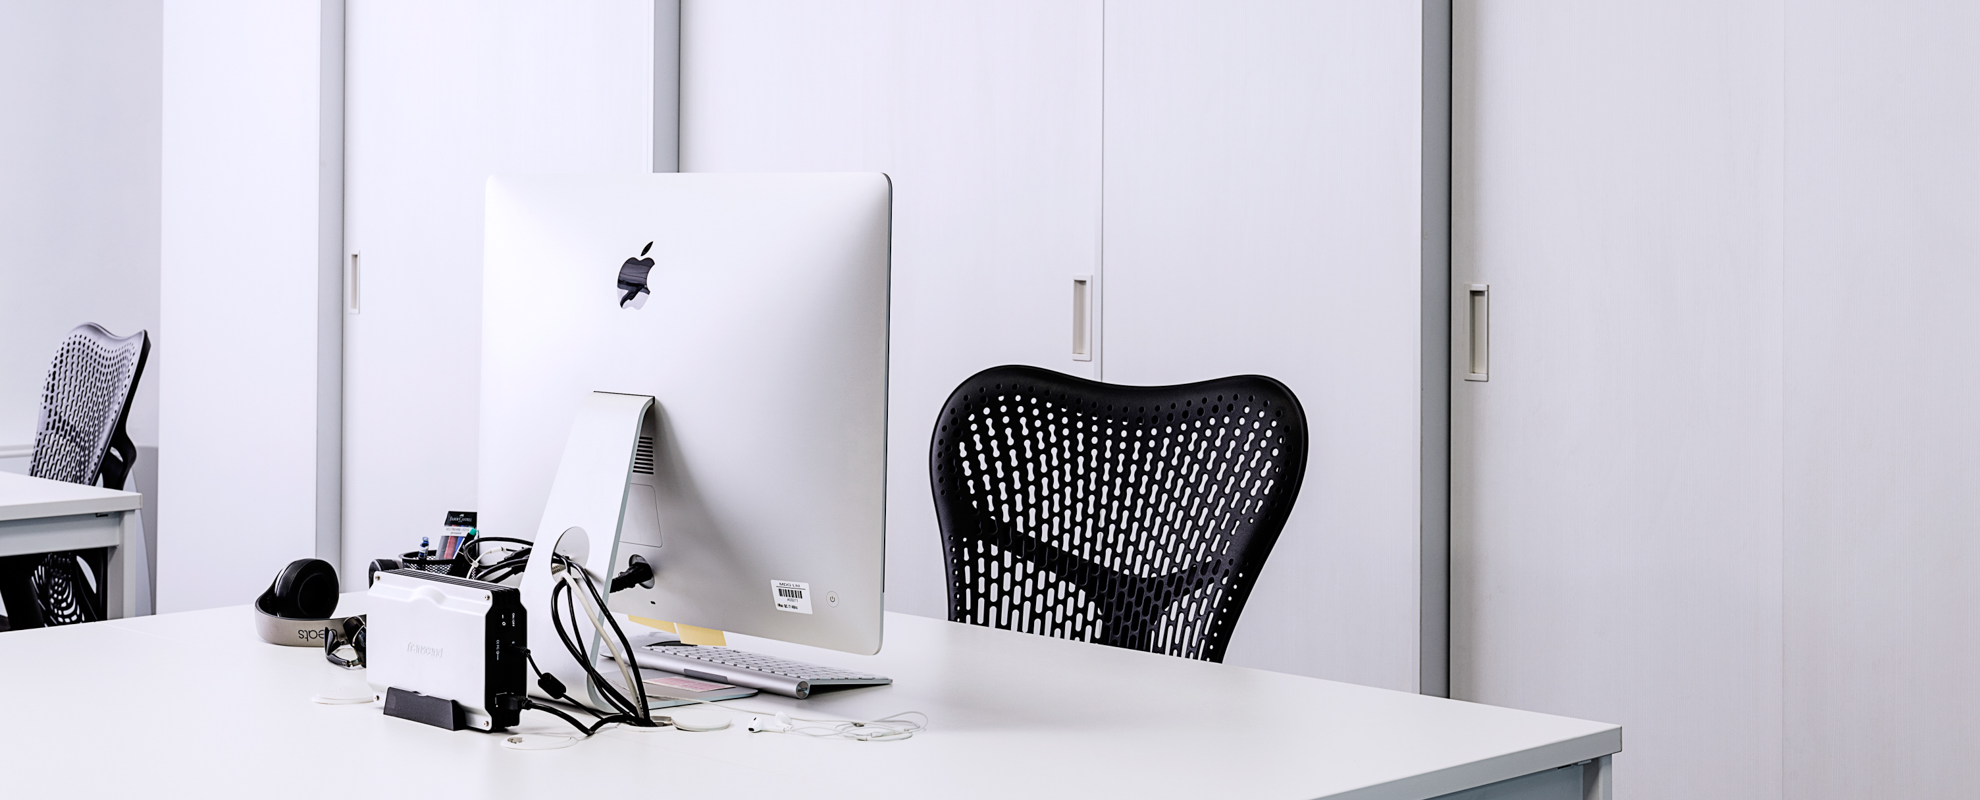 Working Table With Branded iMac